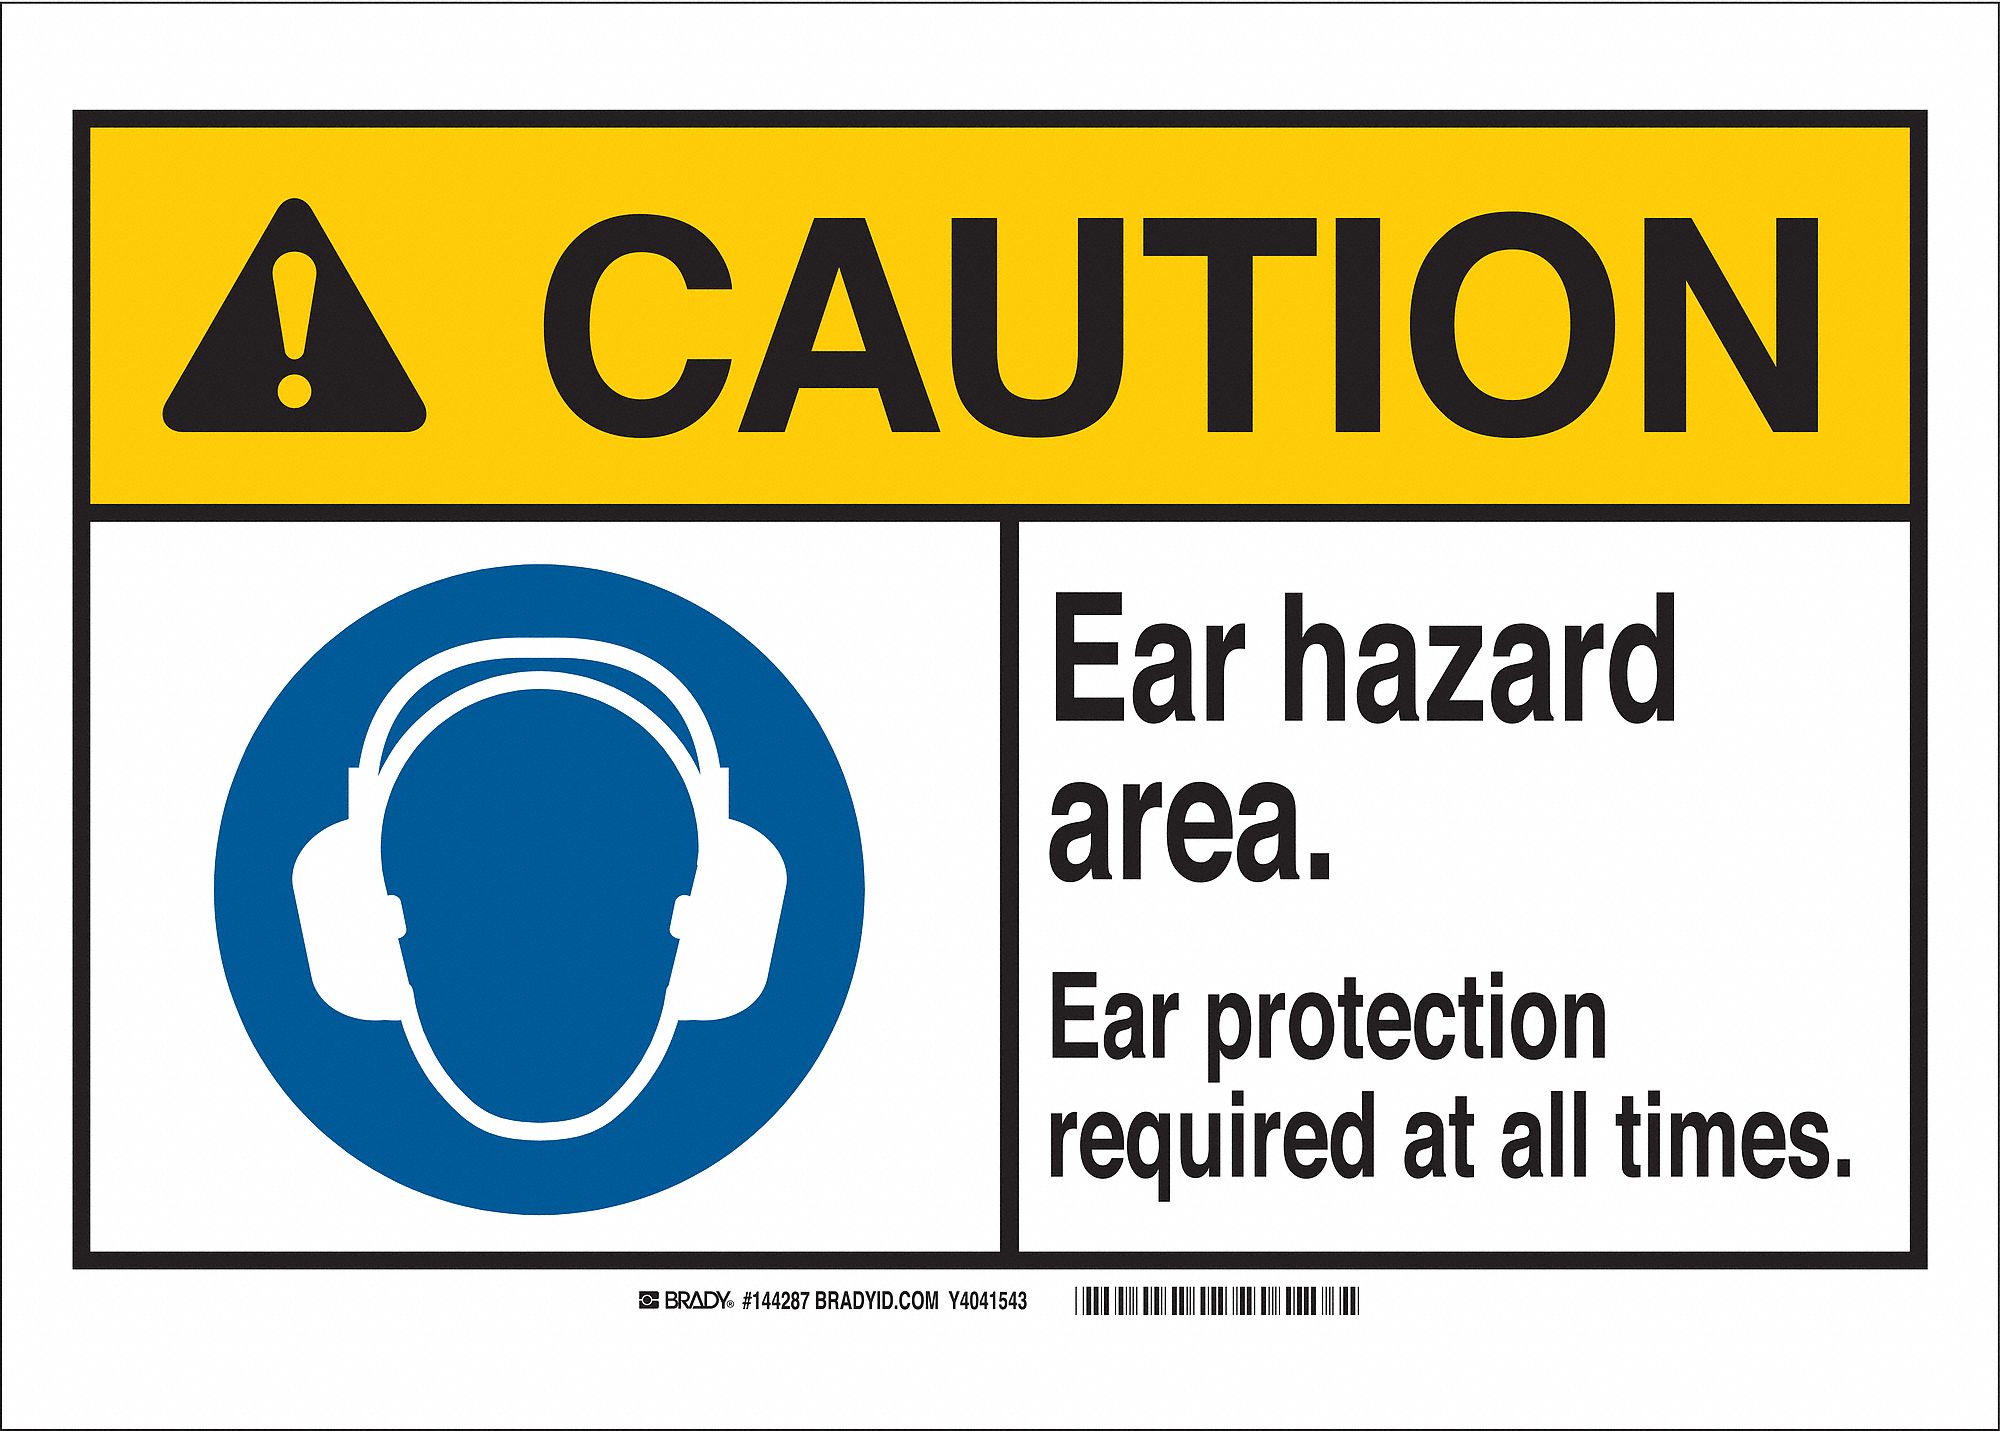 Caution Sign Ear Hazard Area Ear Protection Required At All Times